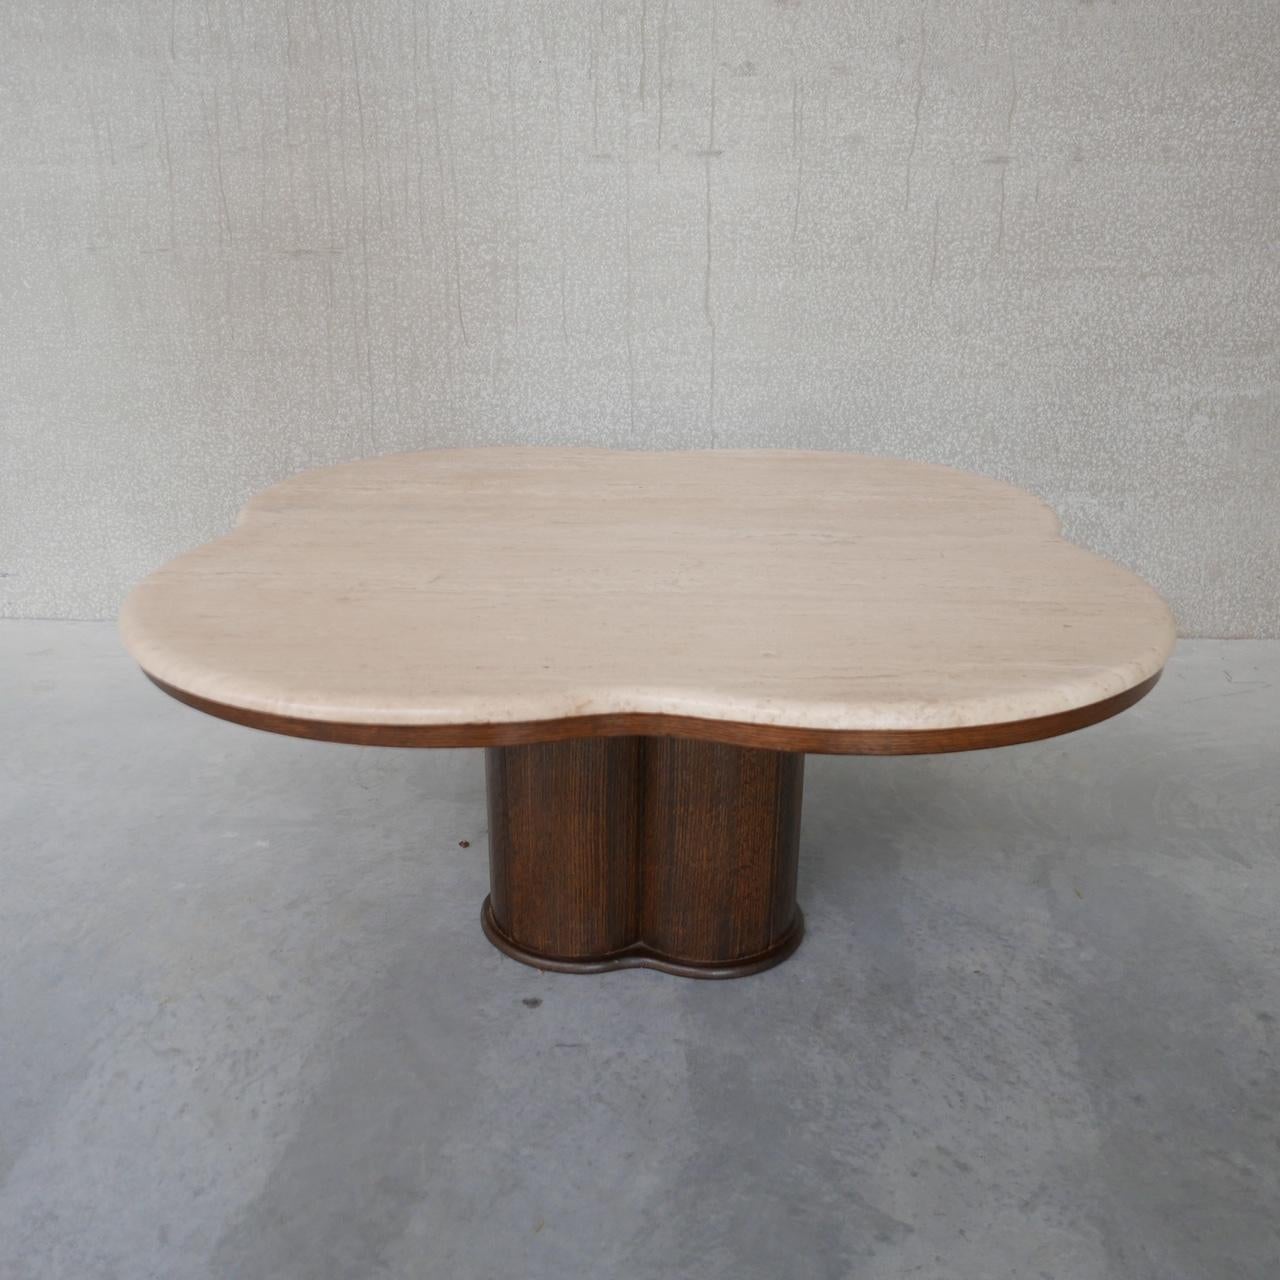 A large four clover leaf style travertine and wood coffee table. 

Belgium, c1970s. 

A pleasant contrast of wood and travertine. 

Immaculate condition. 

Location: Belgium Gallery

Dimensions: 105 W x 105 D x 48 H in cm.

Delivery: